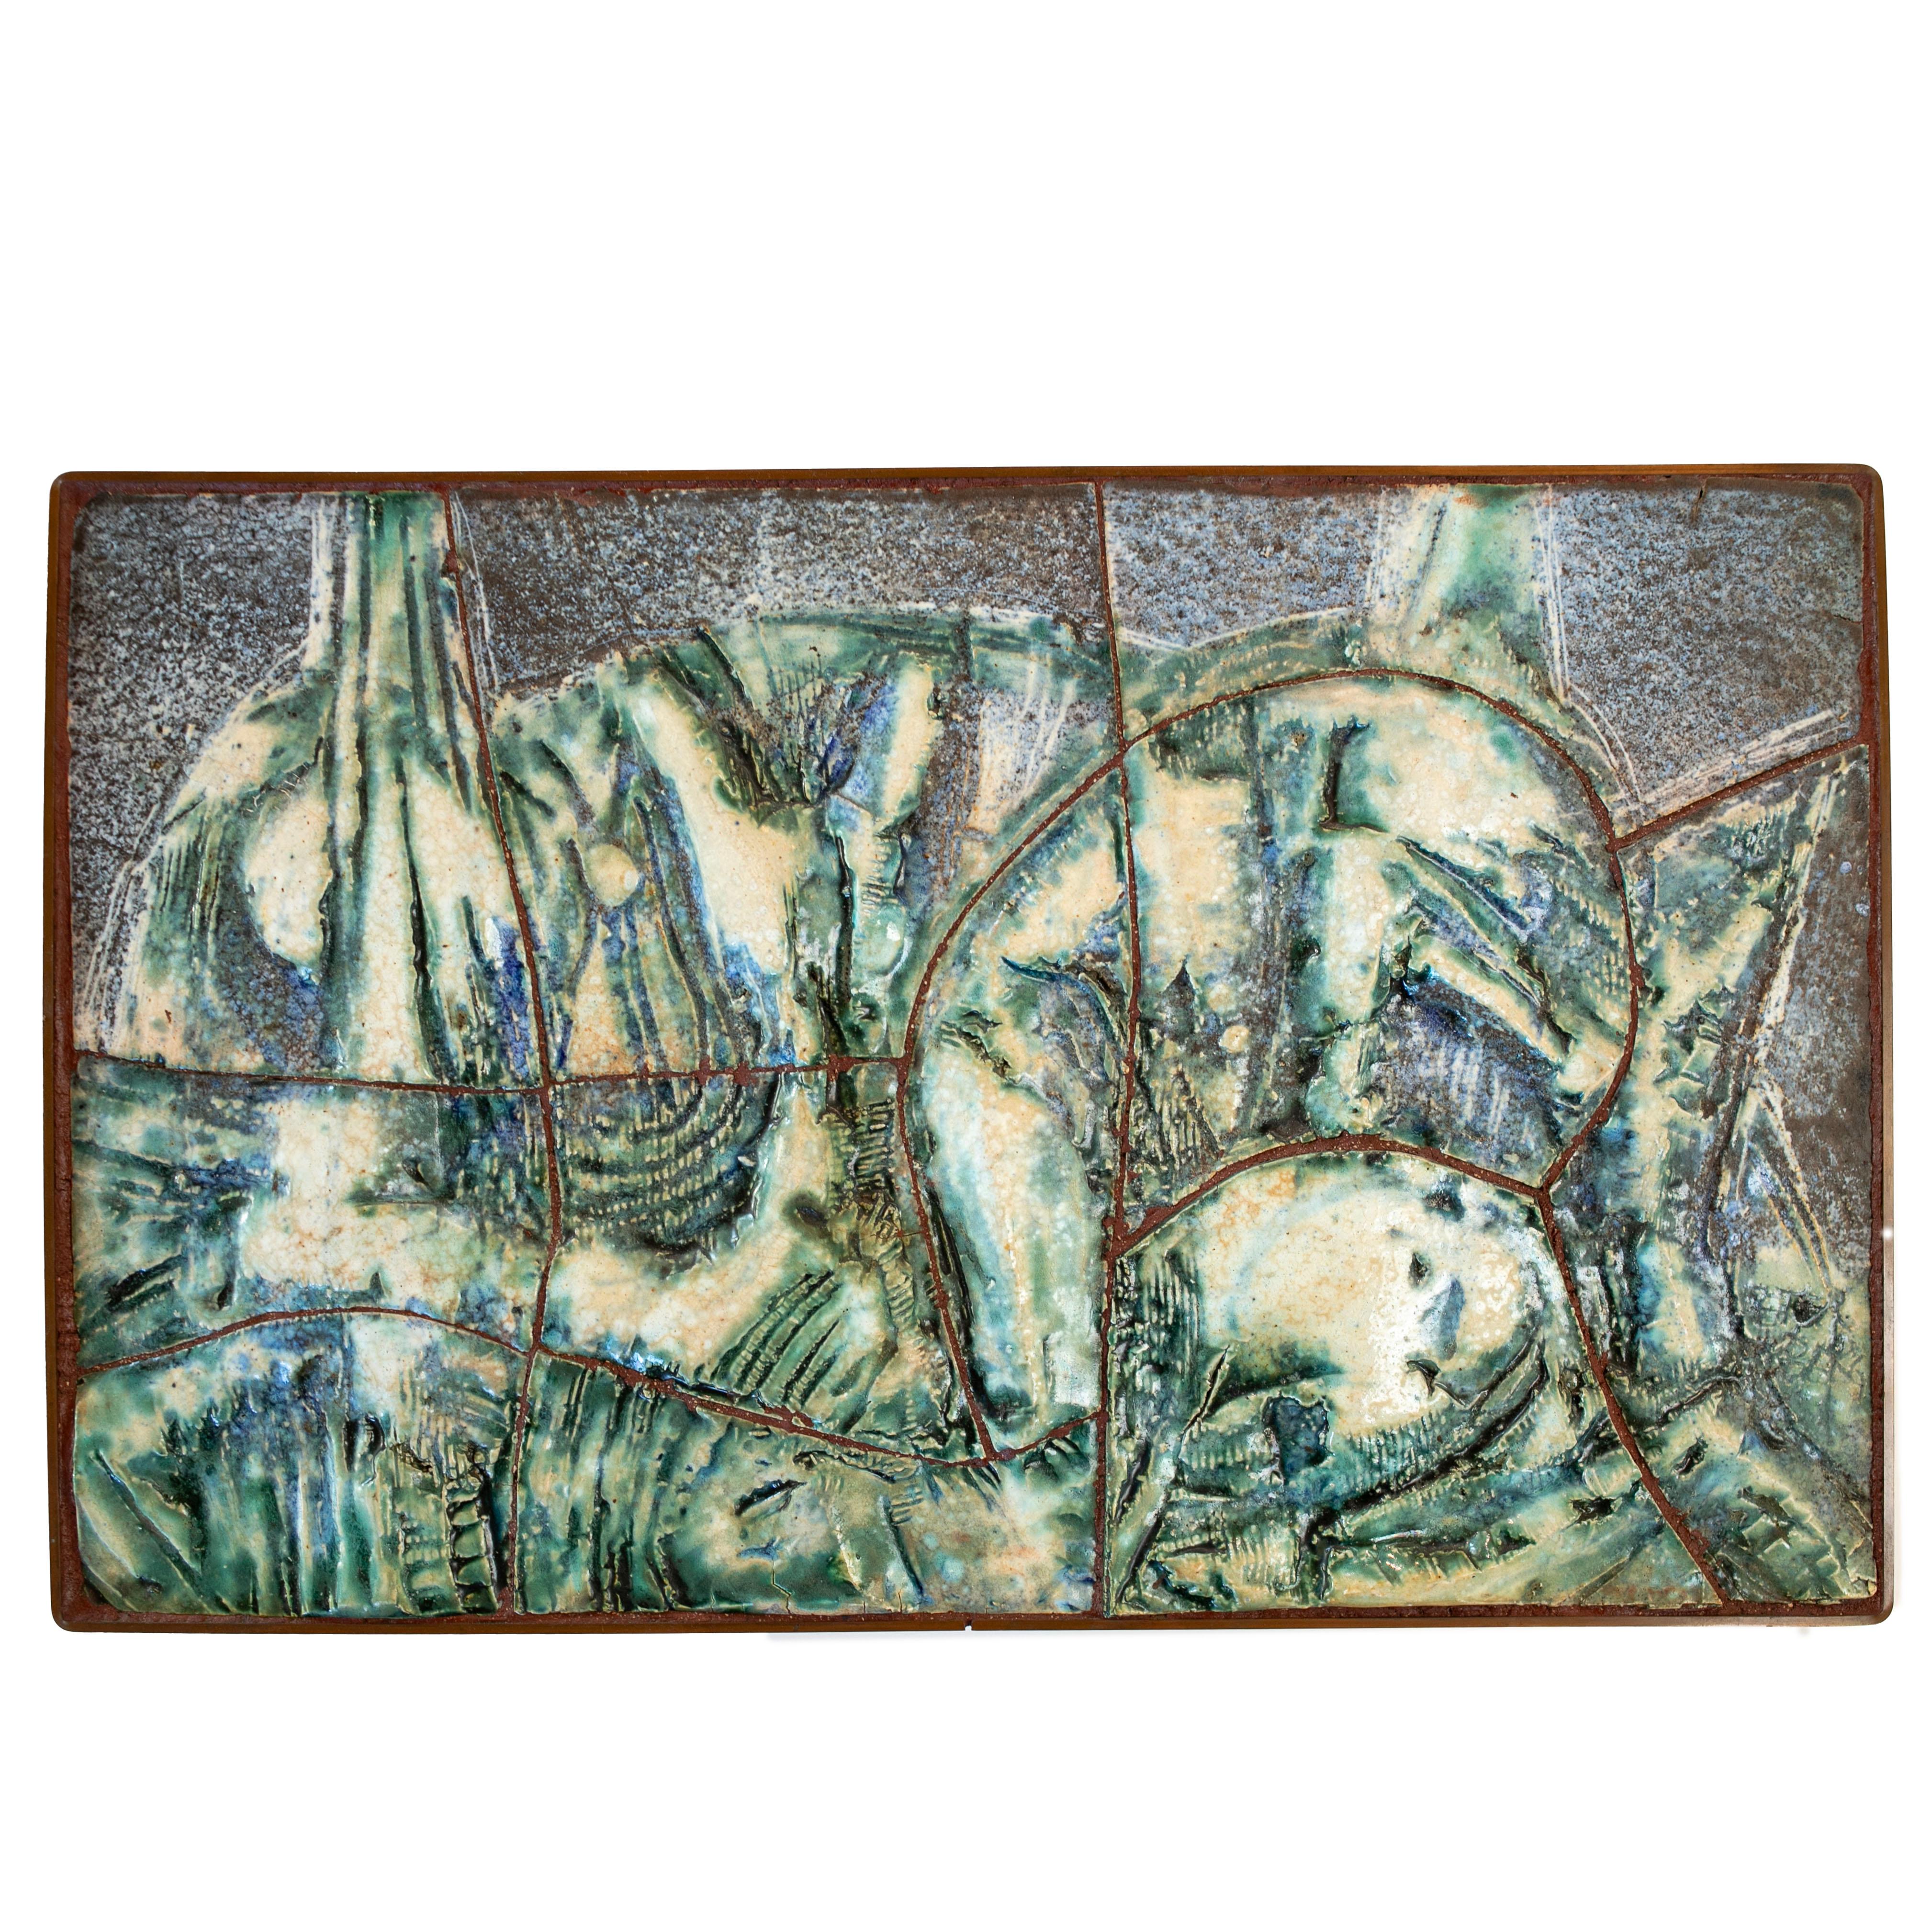 Peter Tybjerg, (Danish) b. 1944
One-of-a-kind stoneware wall relief decorated polychrome glaze. Signed and mounted in a iron frame.
Denmark approx. 1970-1980.

Renowned as a Danish Postwar & Contemporary artist, Peter Tybjerg is celebrated for his